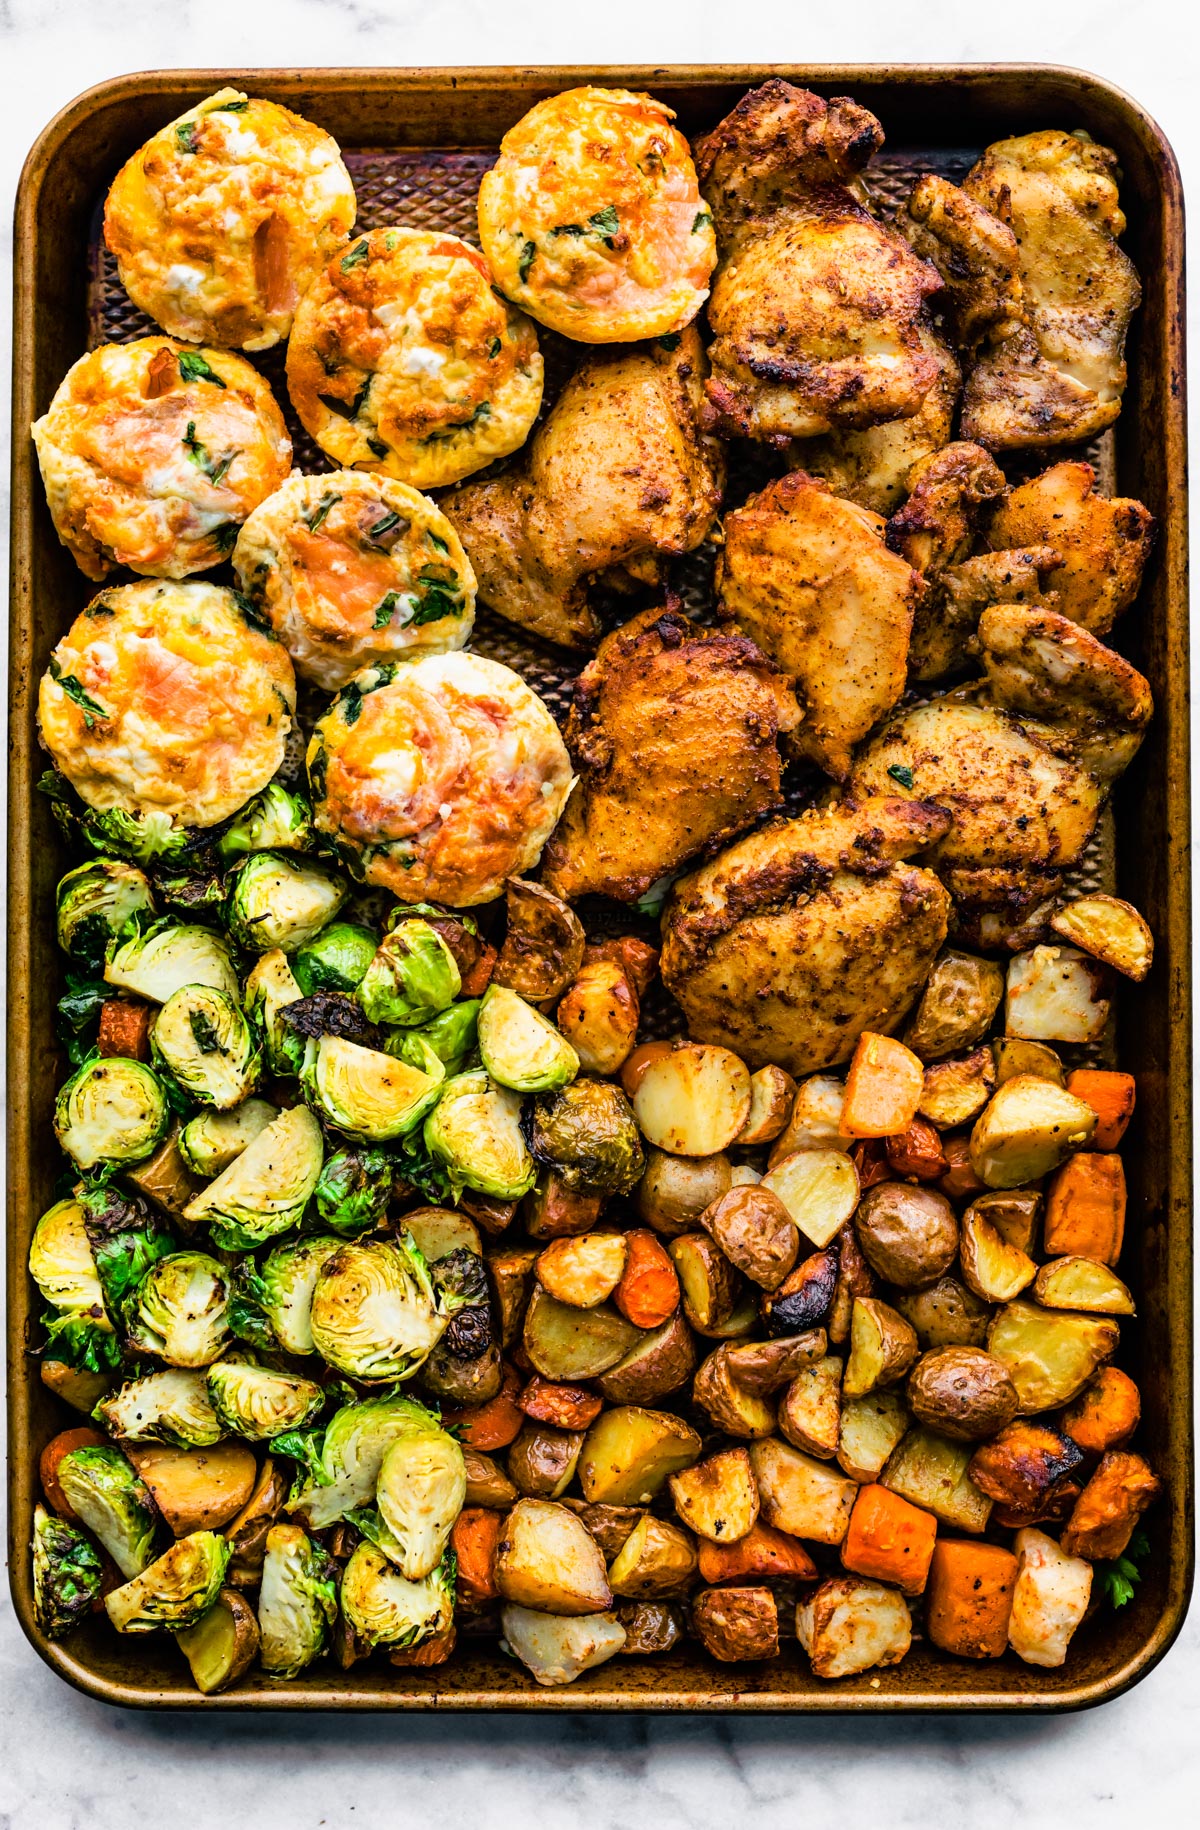 Overhead shot of frittata muffins, chicken, brussel sprouts and potatoes on a sheet pan.